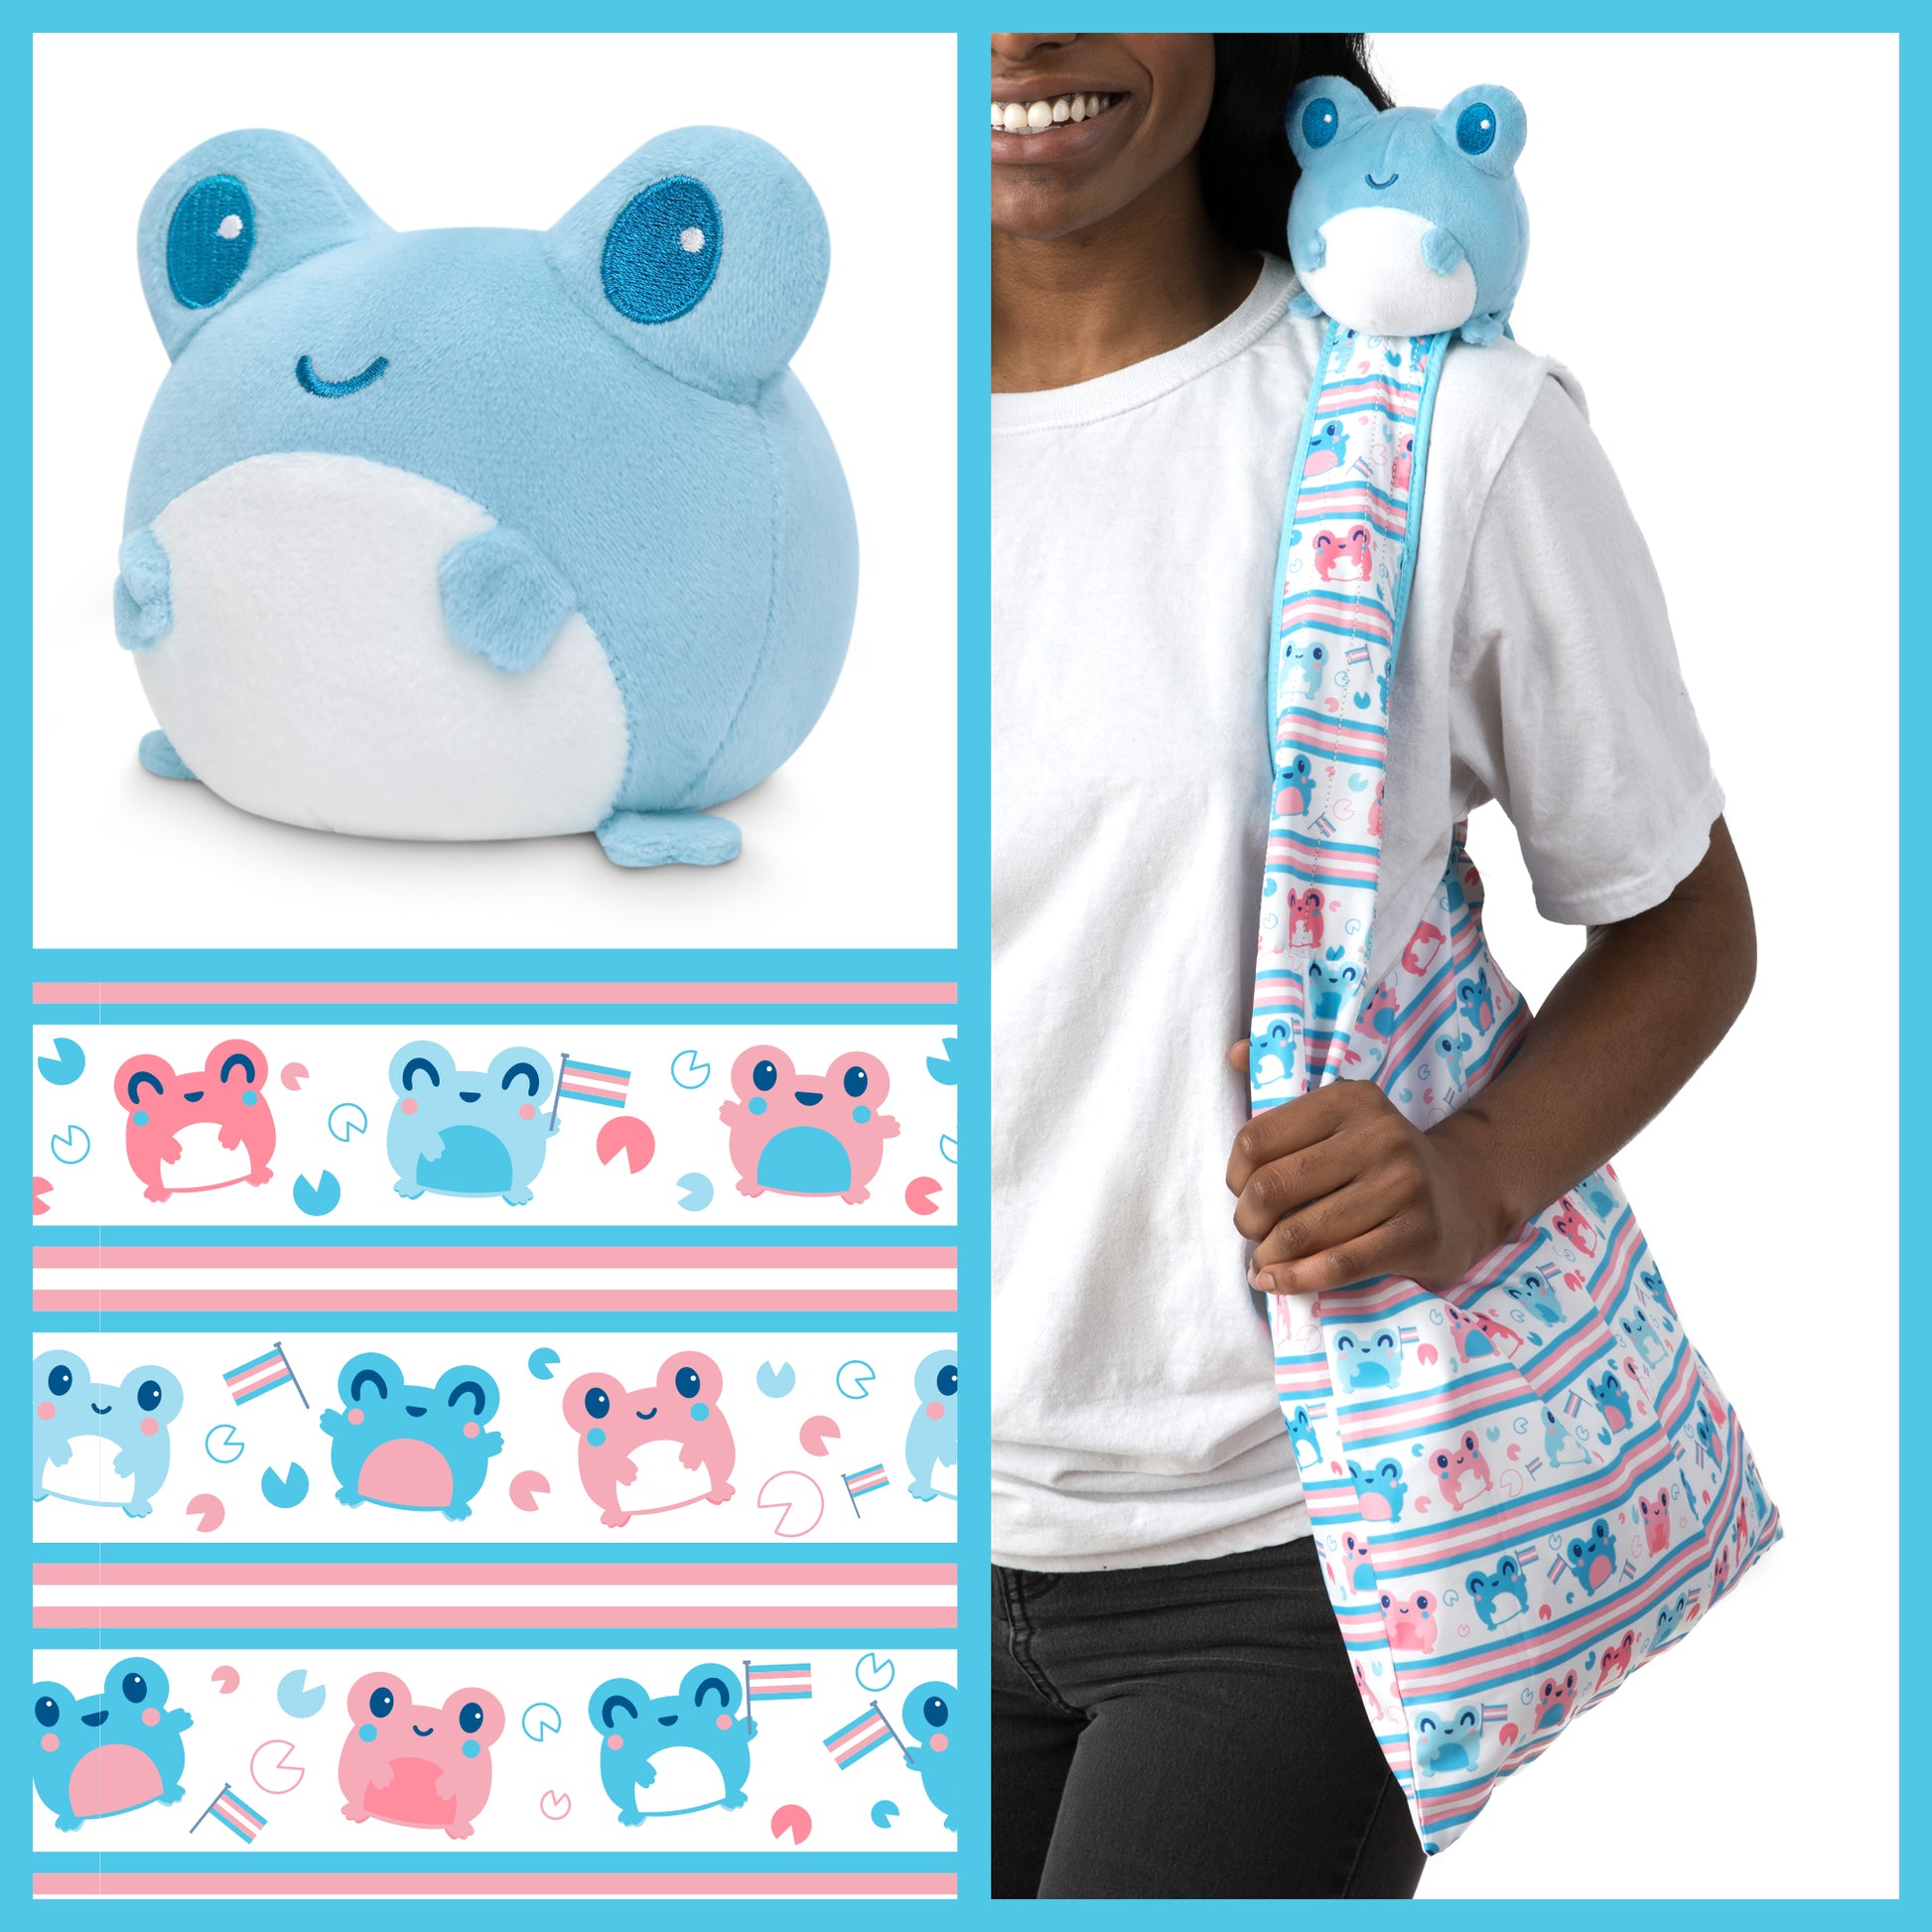 Plushiverse Trans Pride Frog Plushie Tote Bag, the perfect secret tote bag for your TeeTurtle plushies.